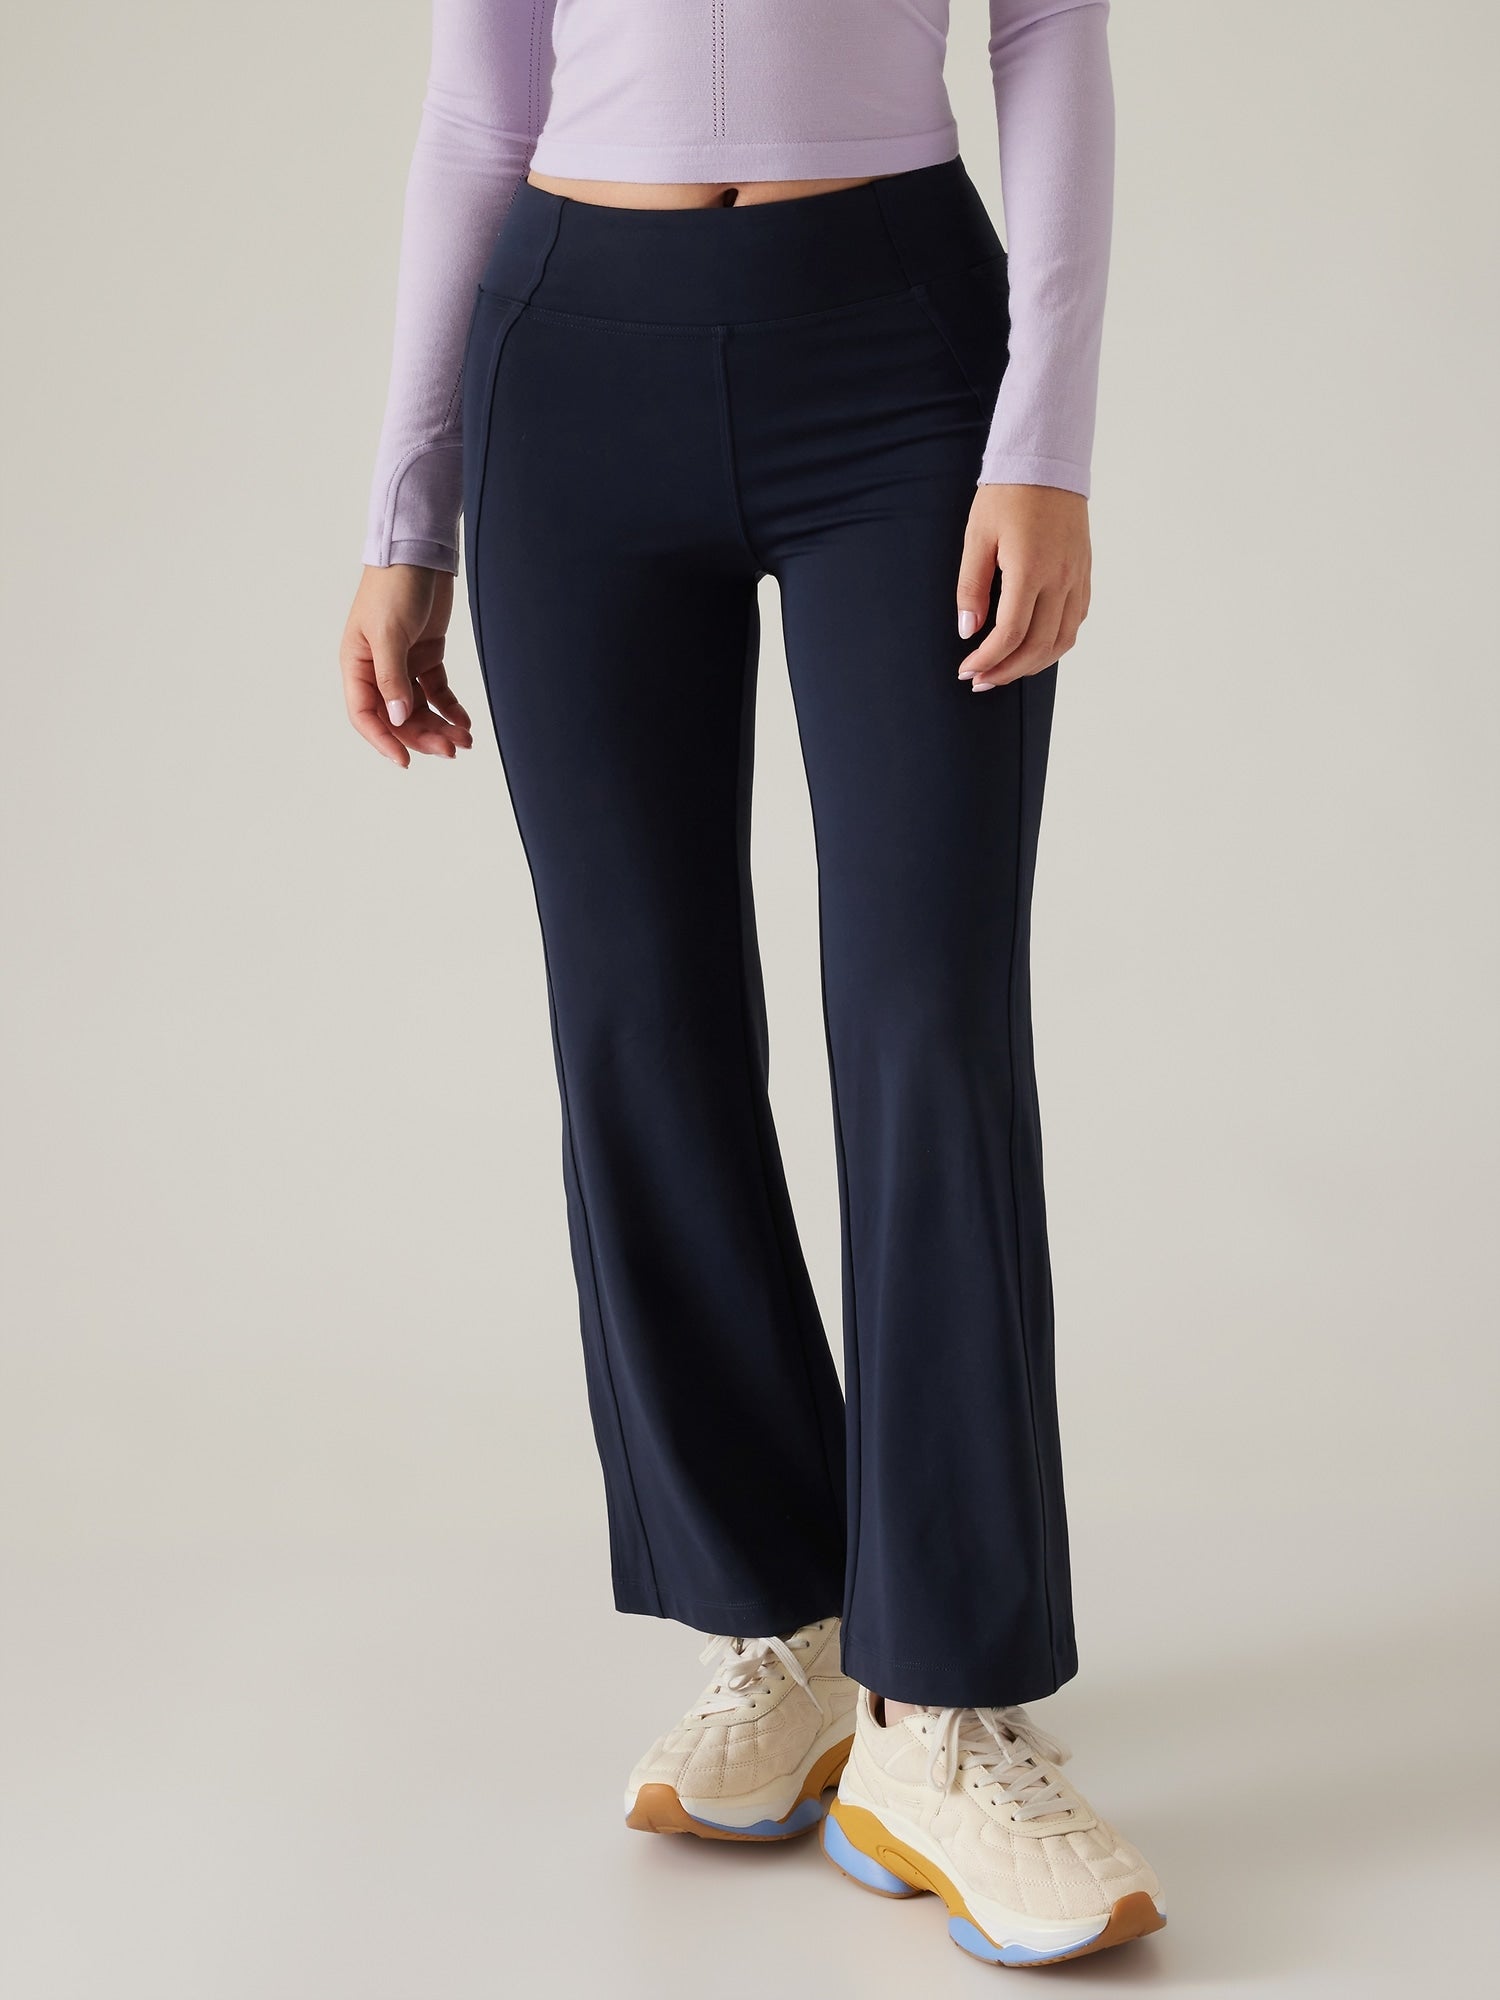 Delancey Skyline Ankle Flare – Search By Inseam